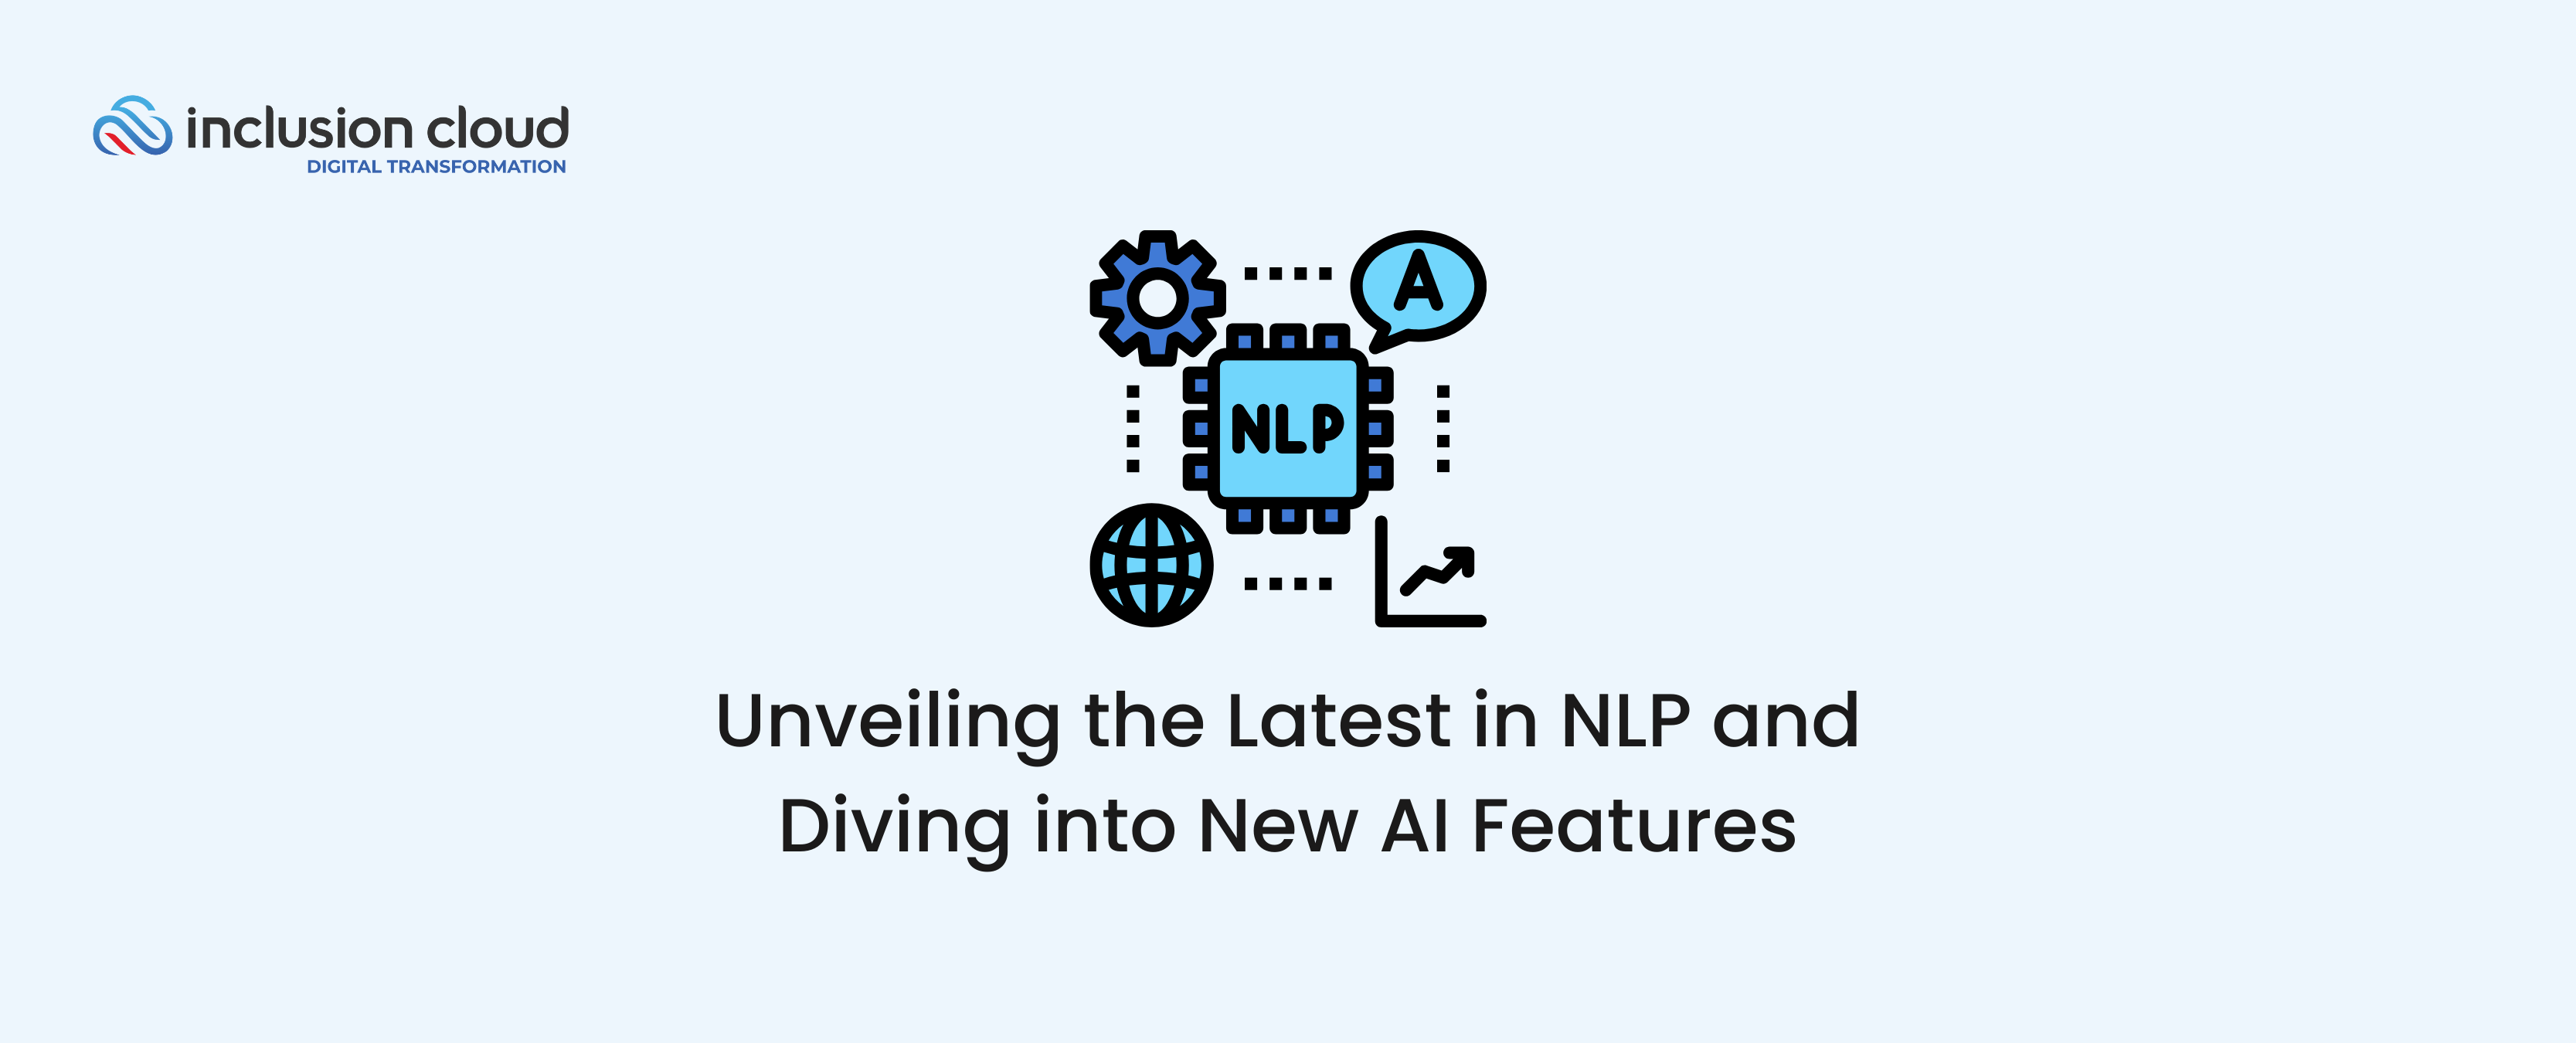 What's New in NLP